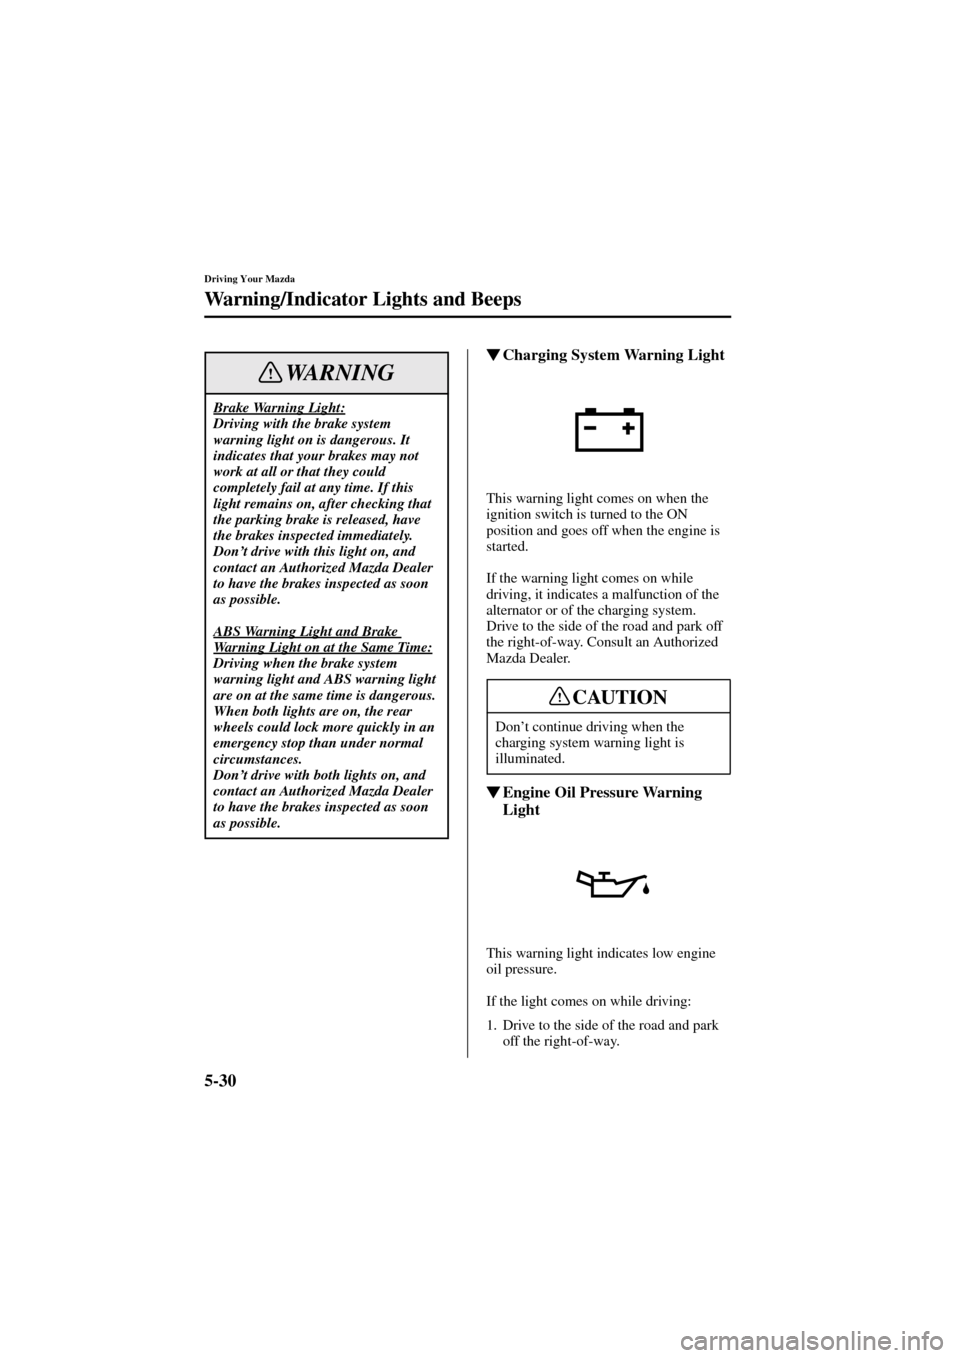 MAZDA MODEL 6 2004  Owners Manual (in English) 5-30
Driving Your Mazda
Warning/Indicator Lights and Beeps
Form No. 8R29-EA-02I
Charging System Warning Light
This warning light comes on when the 
ignition switch is turned to the ON 
position and g